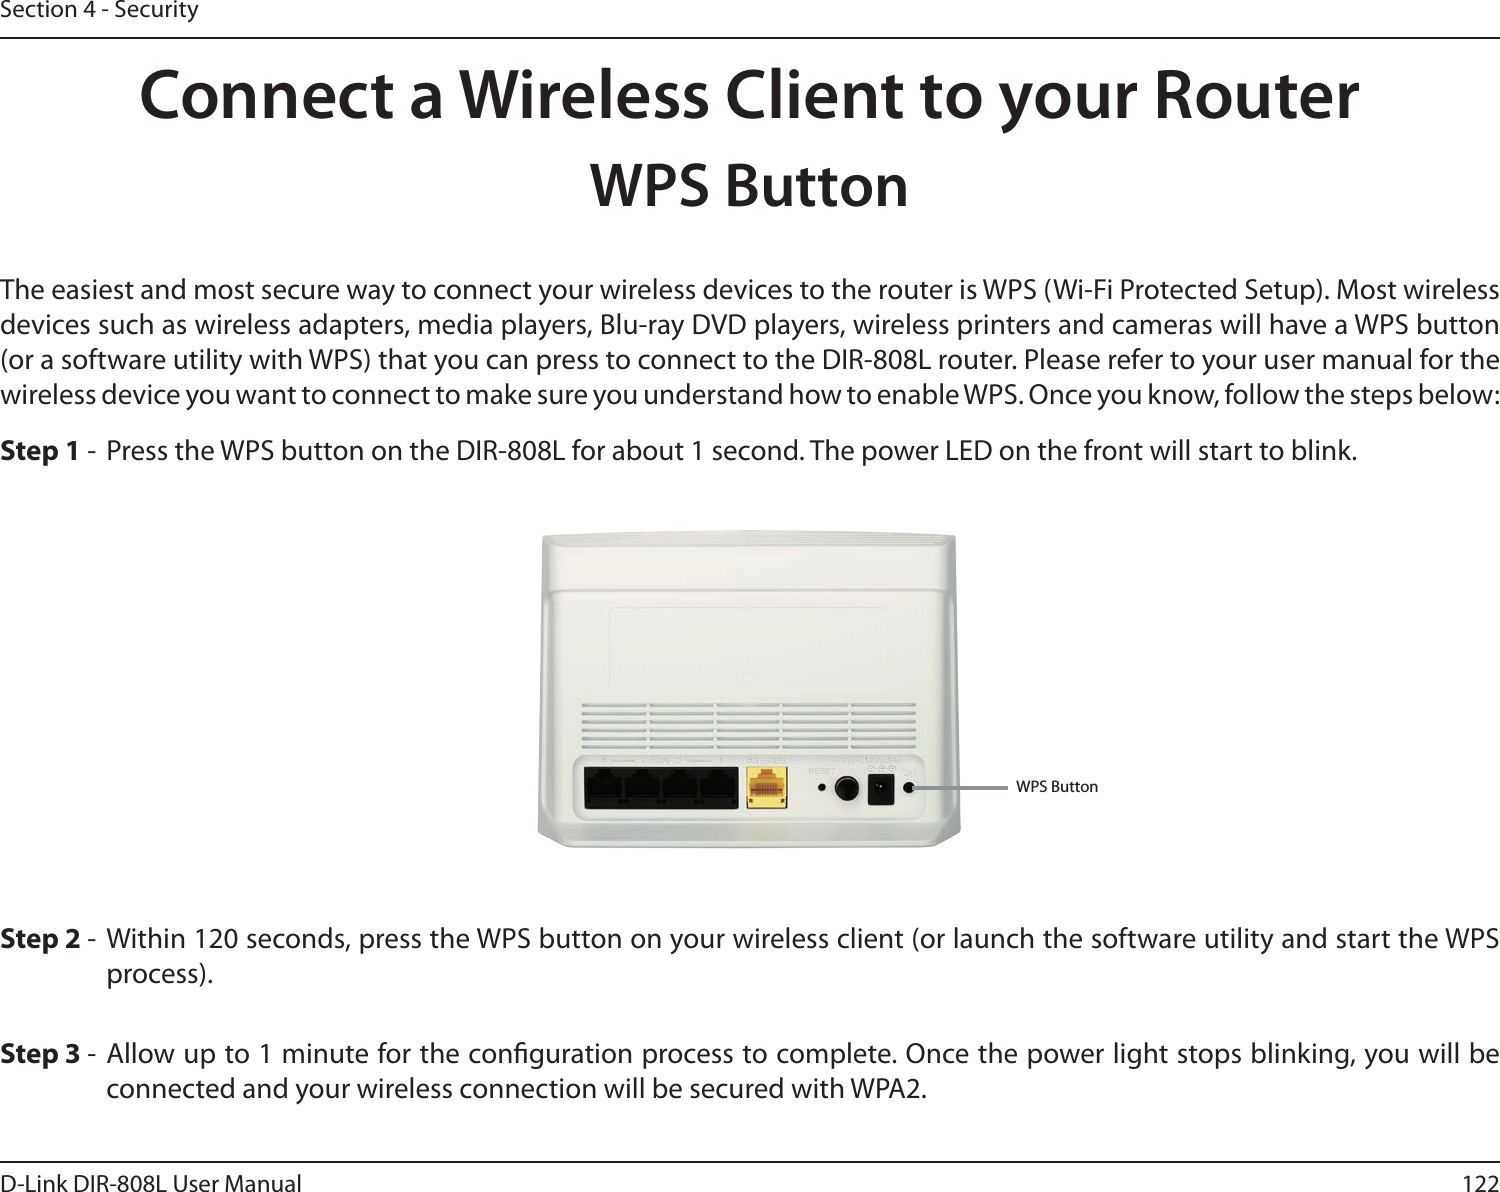 122D-Link DIR-808L User ManualSection 4 - SecurityConnect a Wireless Client to your RouterWPS ButtonStep 2 -  Within 120 seconds, press the WPS button on your wireless client (or launch the software utility and start the WPS process).The easiest and most secure way to connect your wireless devices to the router is WPS (Wi-Fi Protected Setup). Most wireless devices such as wireless adapters, media players, Blu-ray DVD players, wireless printers and cameras will have a WPS button (or a software utility with WPS) that you can press to connect to the DIR-808L router. Please refer to your user manual for the wireless device you want to connect to make sure you understand how to enable WPS. Once you know, follow the steps below:Step 1 -  Press the WPS button on the DIR-808L for about 1 second. The power LED on the front will start to blink.Step 3 -  Allow up to 1 minute for the conguration process to complete. Once the power light stops blinking, you will be connected and your wireless connection will be secured with WPA2.WPS Button